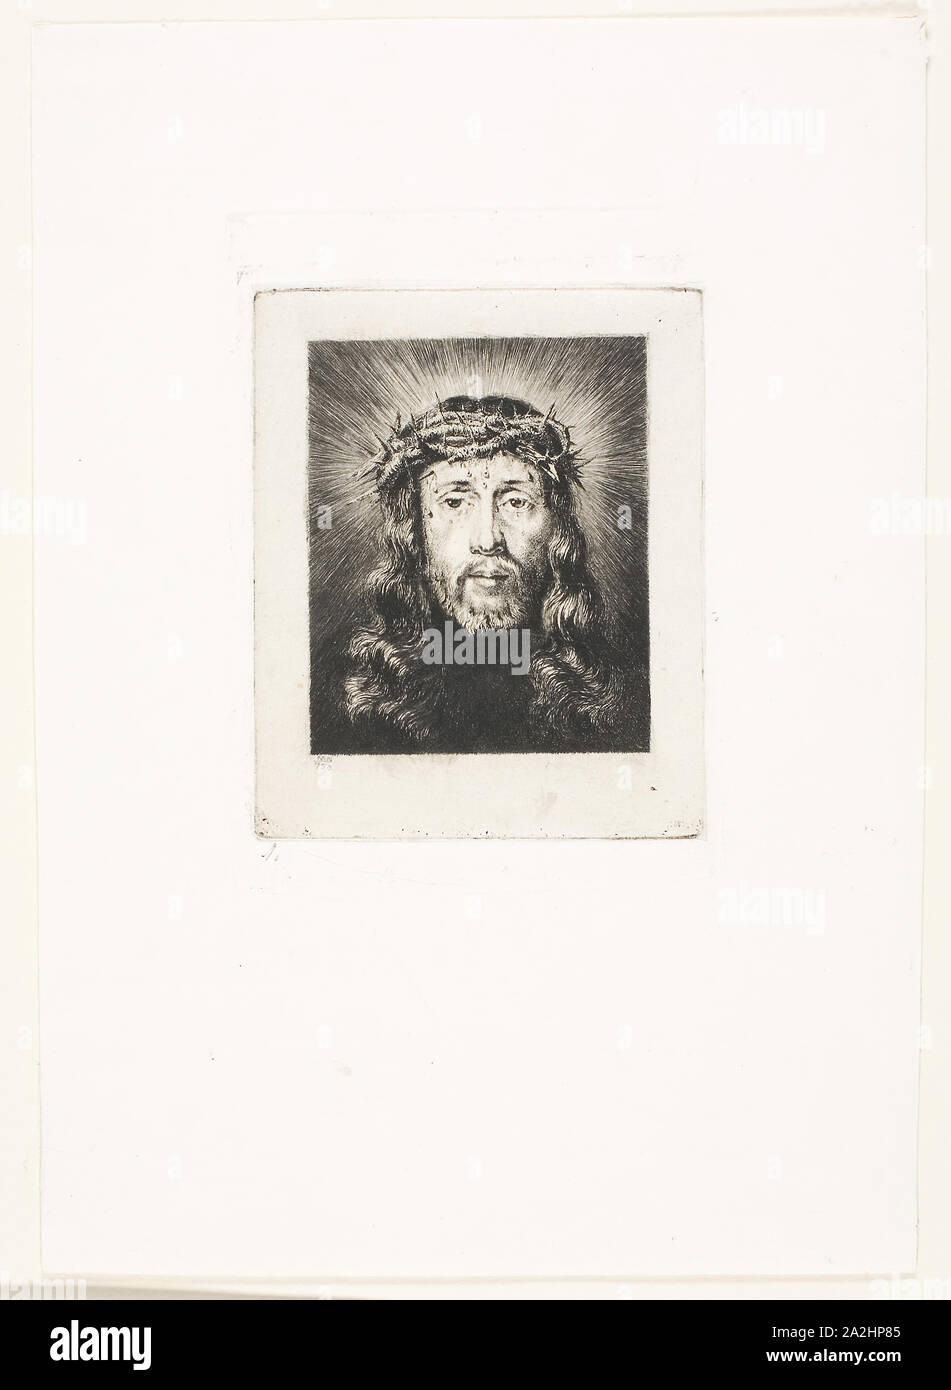 The Face of Christ, 1849, Charles Meryon (French, 1821-1868), after a minature by Elise Brurère (French, 19th century), after a painting by Philippe de Champaigne (French, 1602-1674), France, Etching with roulette on ivory China paper, laid down on ivory wove paper, 81 × 65 mm (image), 106 × 87 mm (plate), 107 × 82 mm (primary support), 242 × 172 mm (secondary support Stock Photo